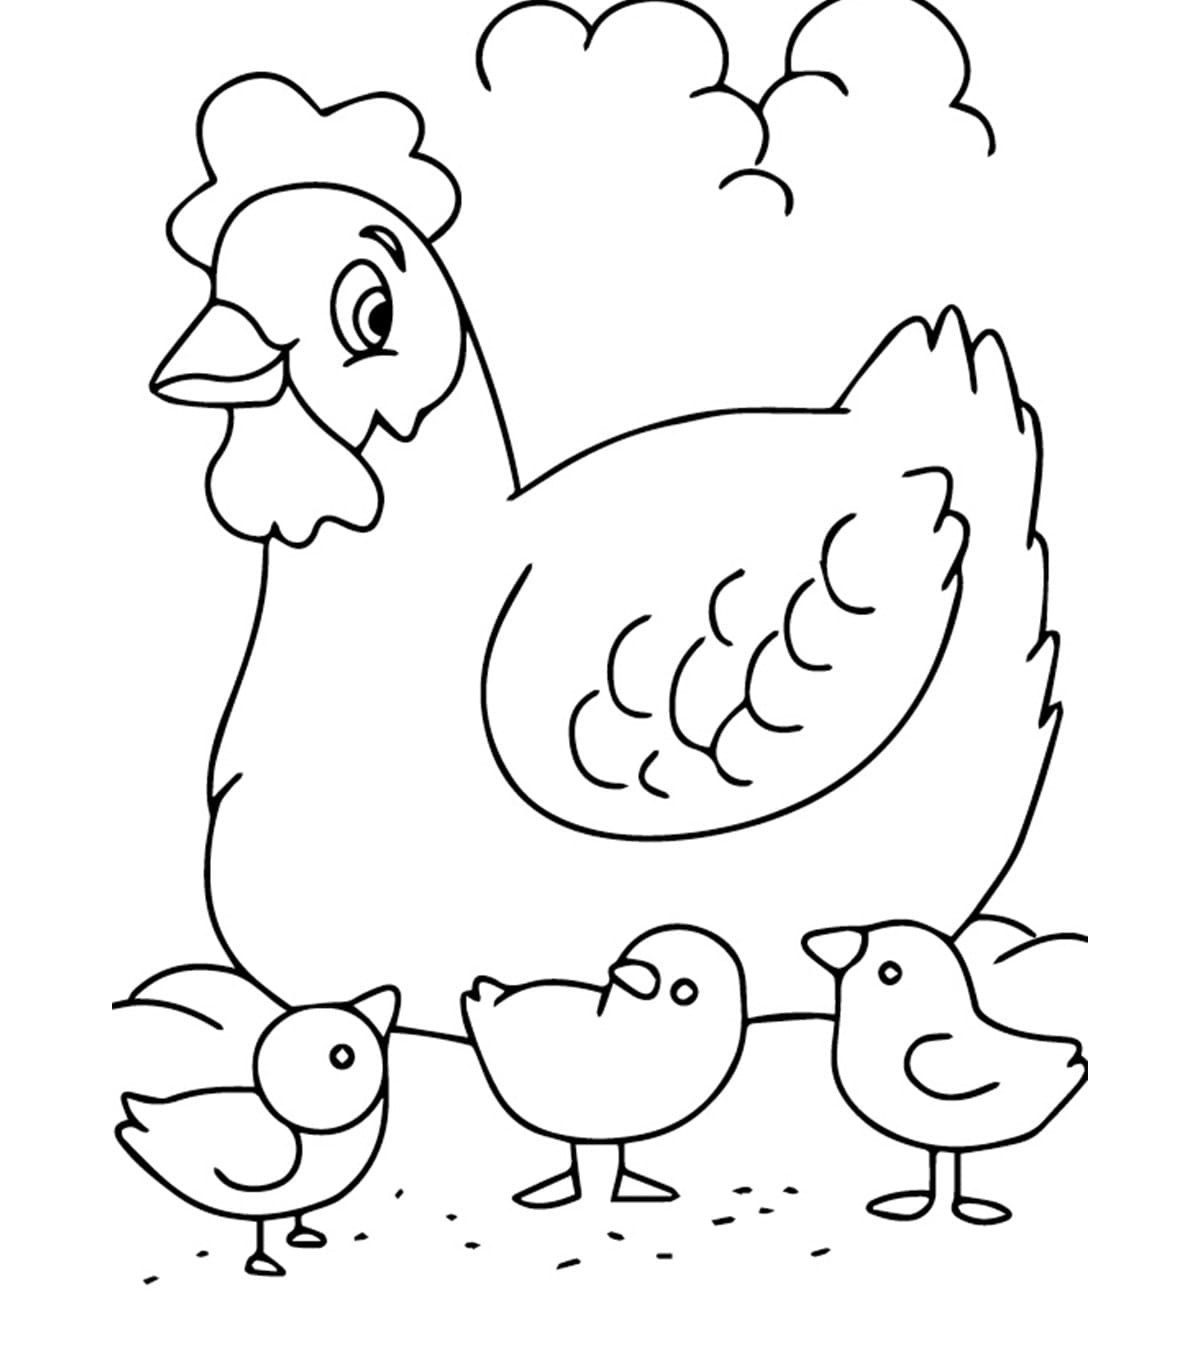 Farm Animals Coloring Pages 100 Free Coloring Pages for Kids